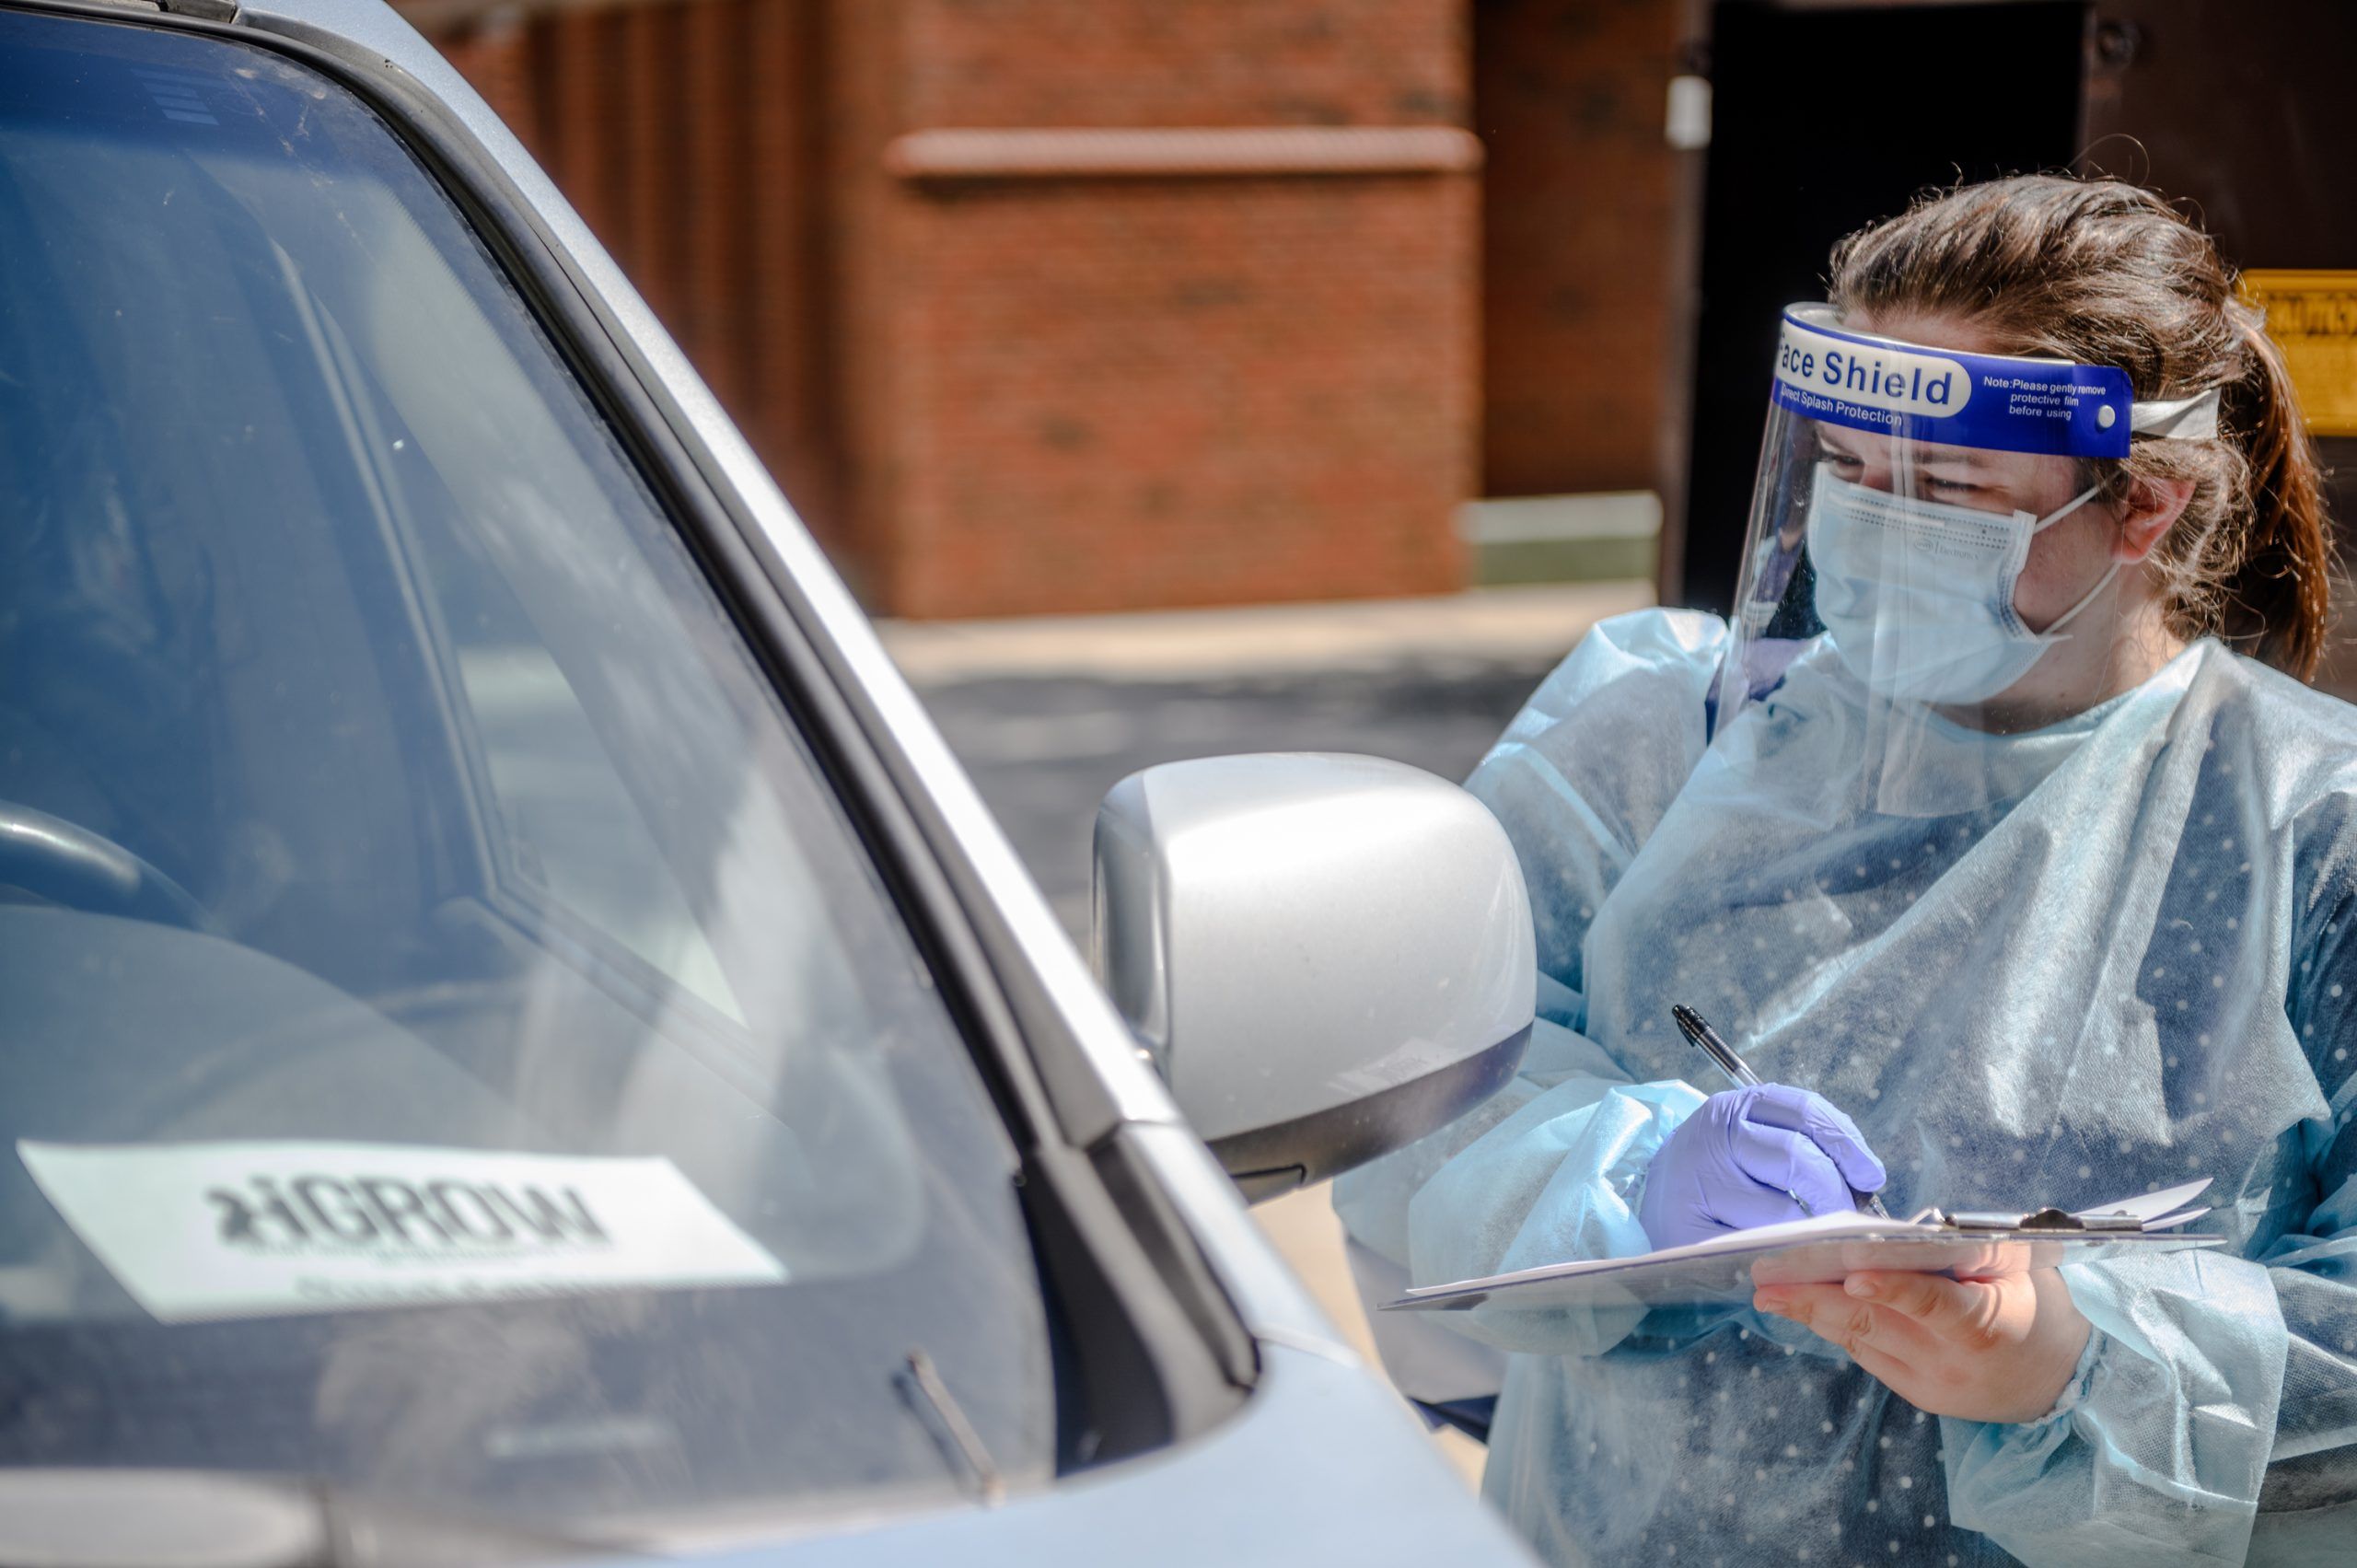 A researcher gathering data from a family by their car in July 2020 wearing a mask